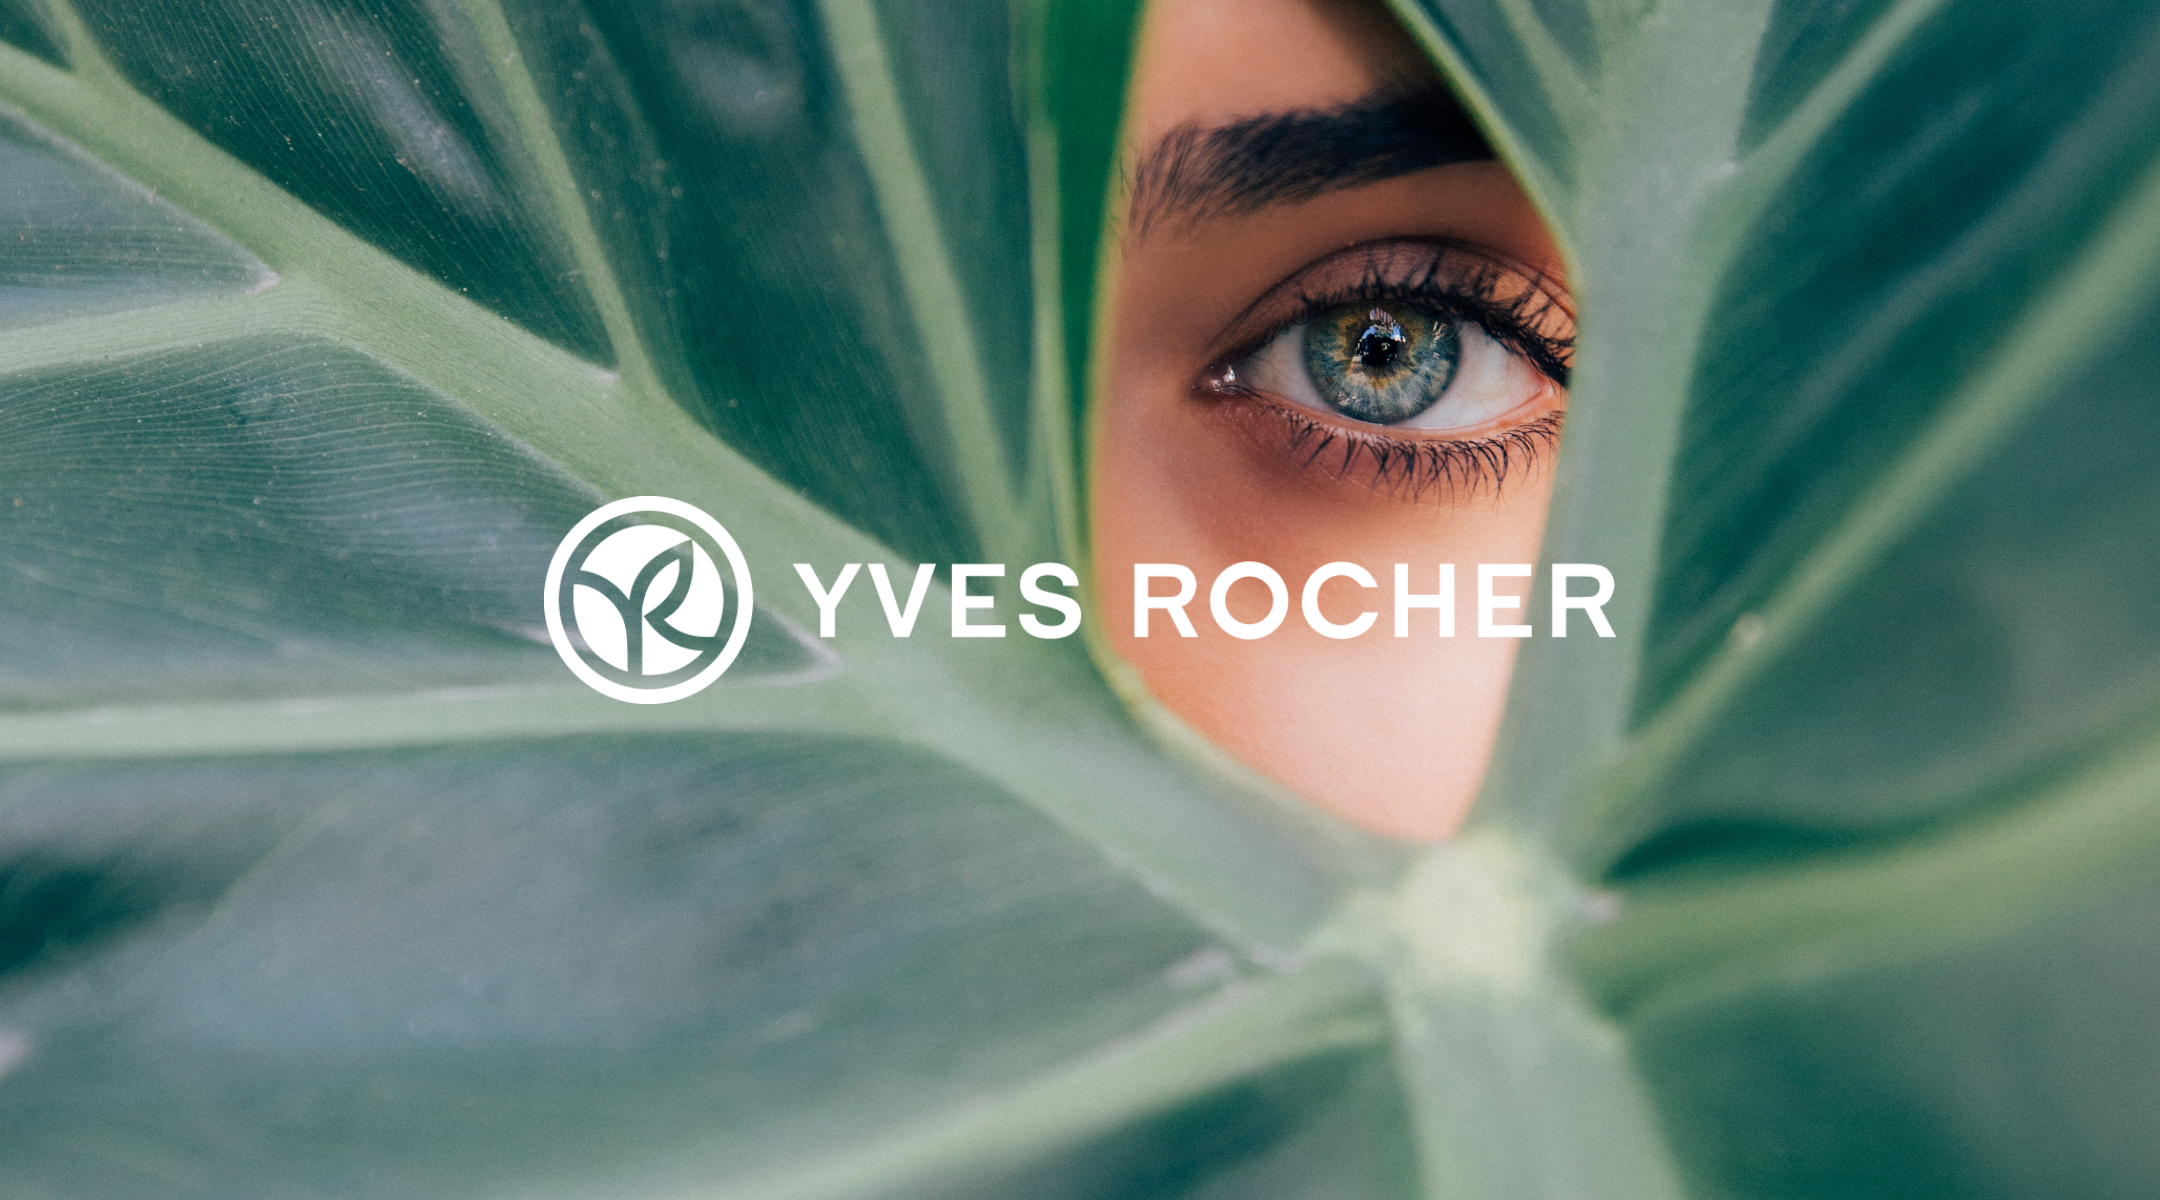 Yves Rocher Upgrades Personalization With Bloomreach’s Real-Time Product Recommendations